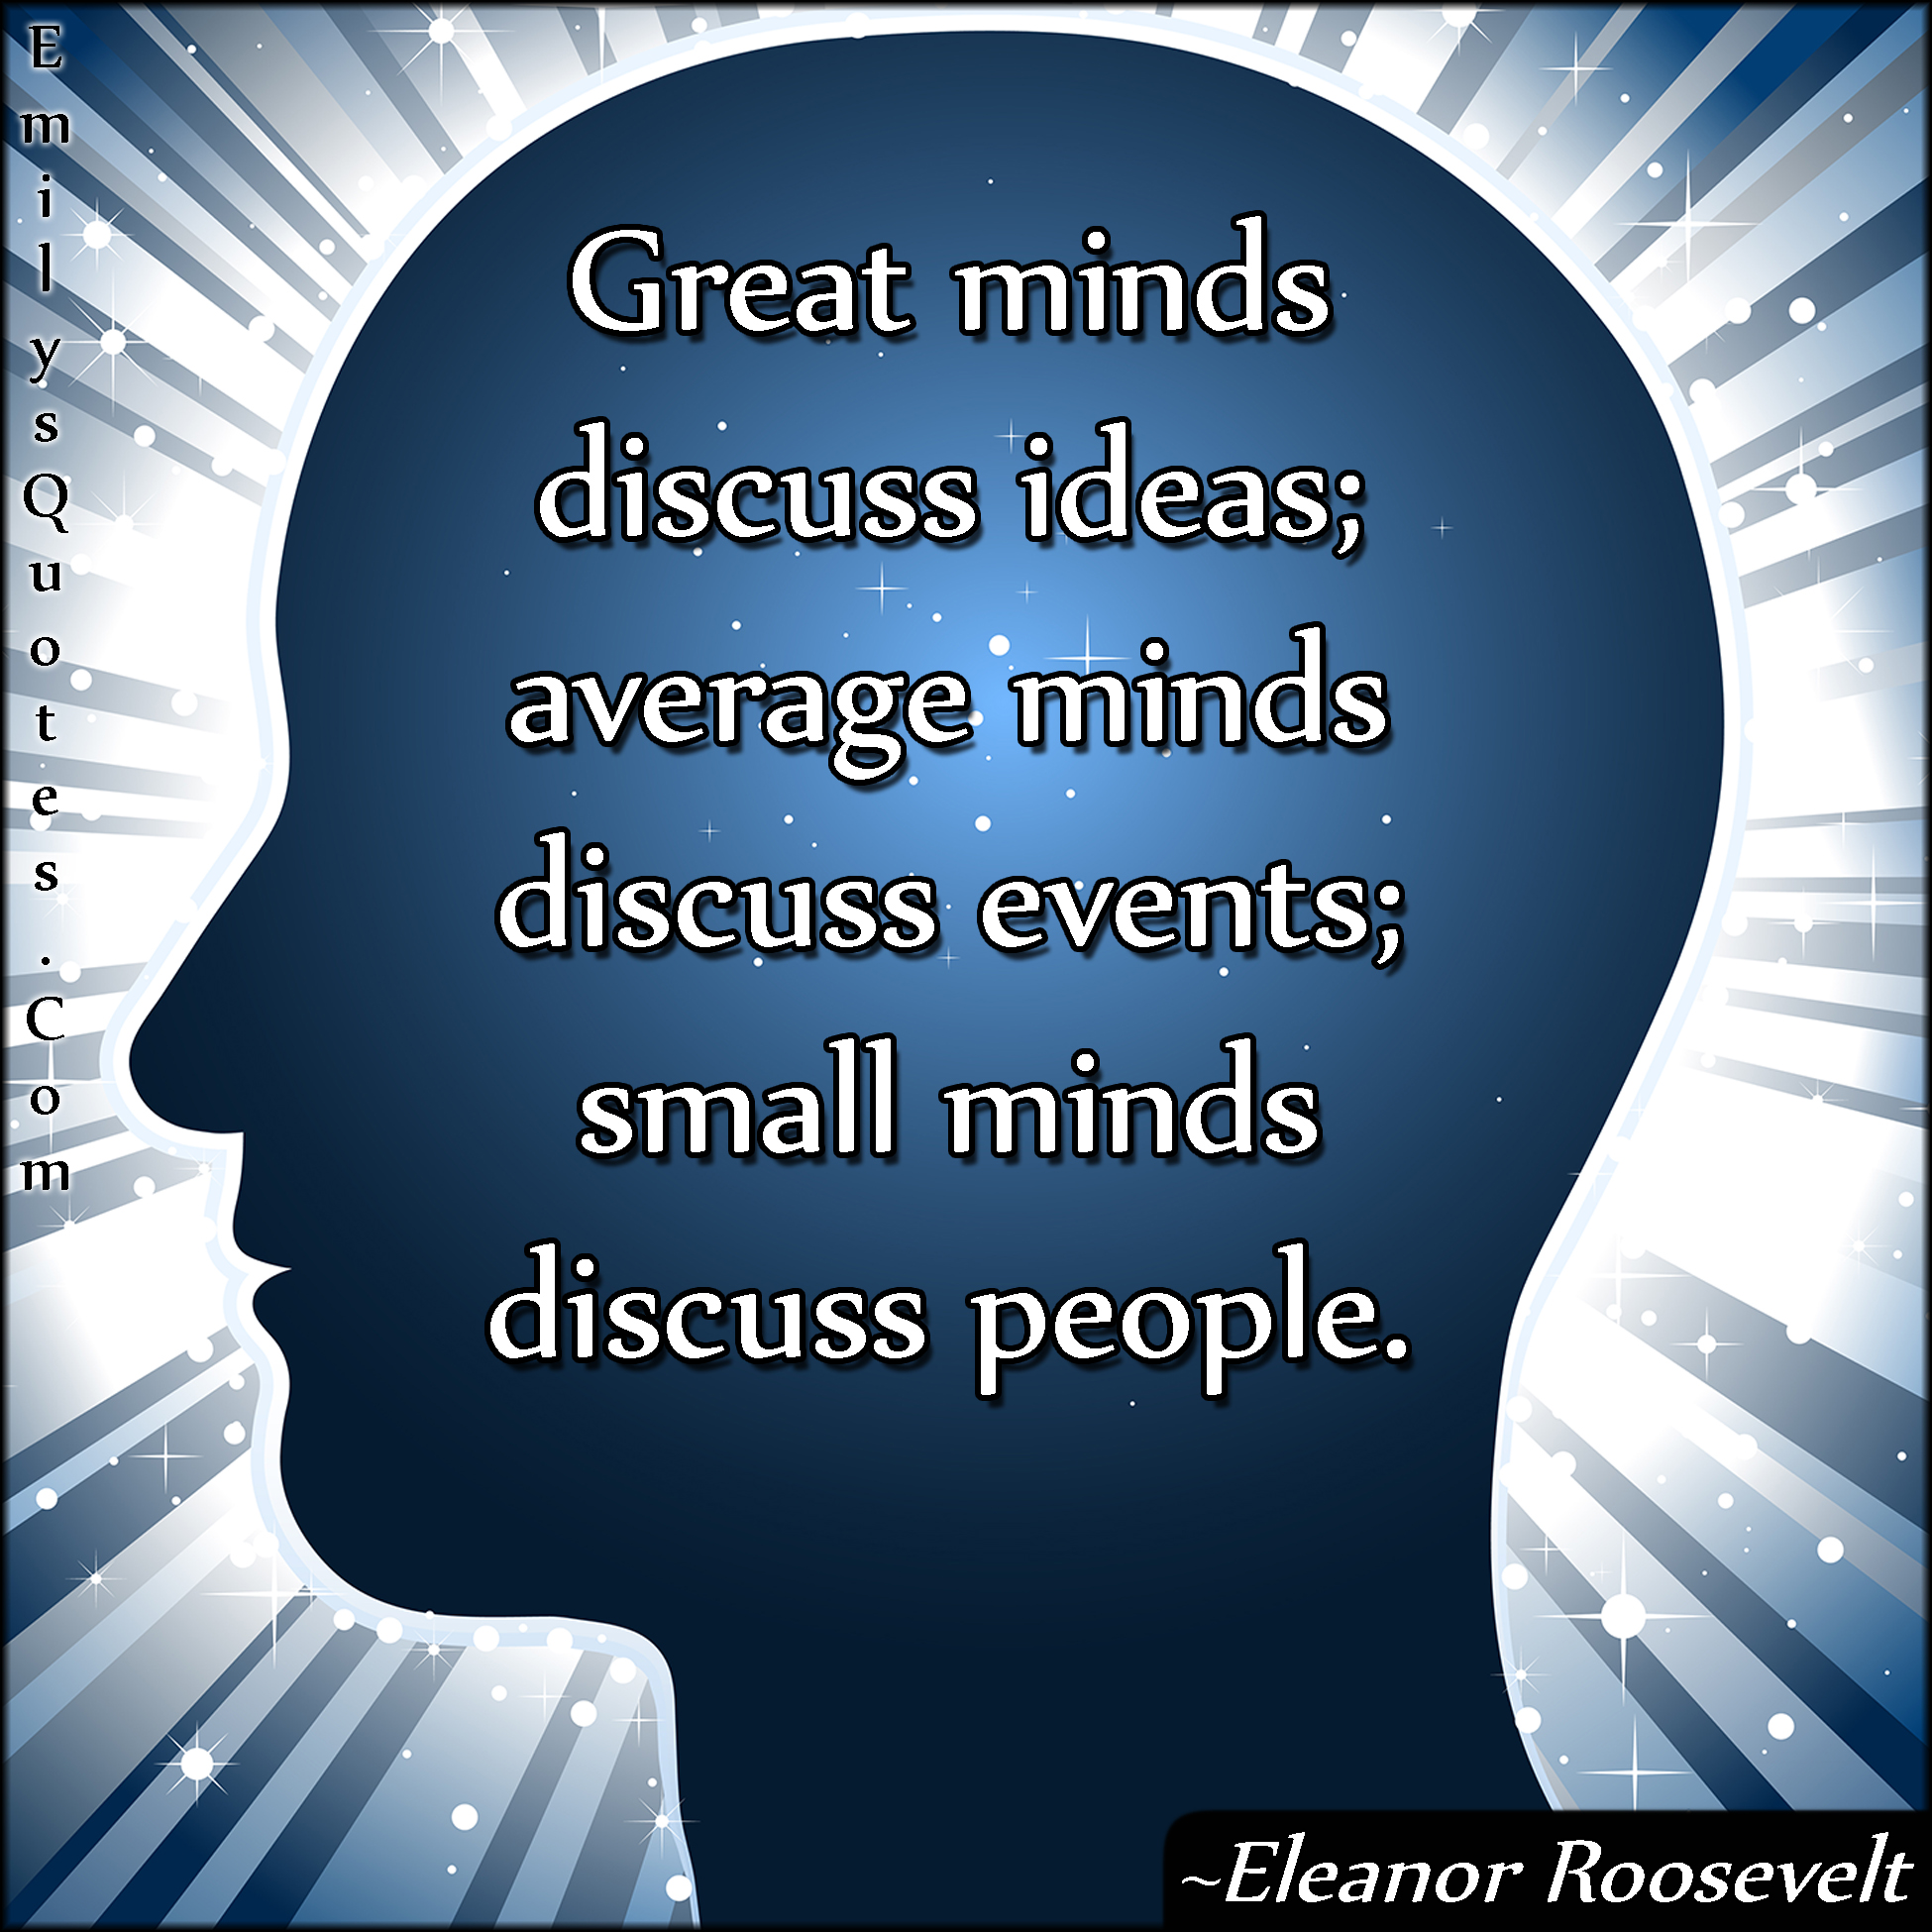 Great minds discuss ideas; average minds discuss events; small minds discuss people